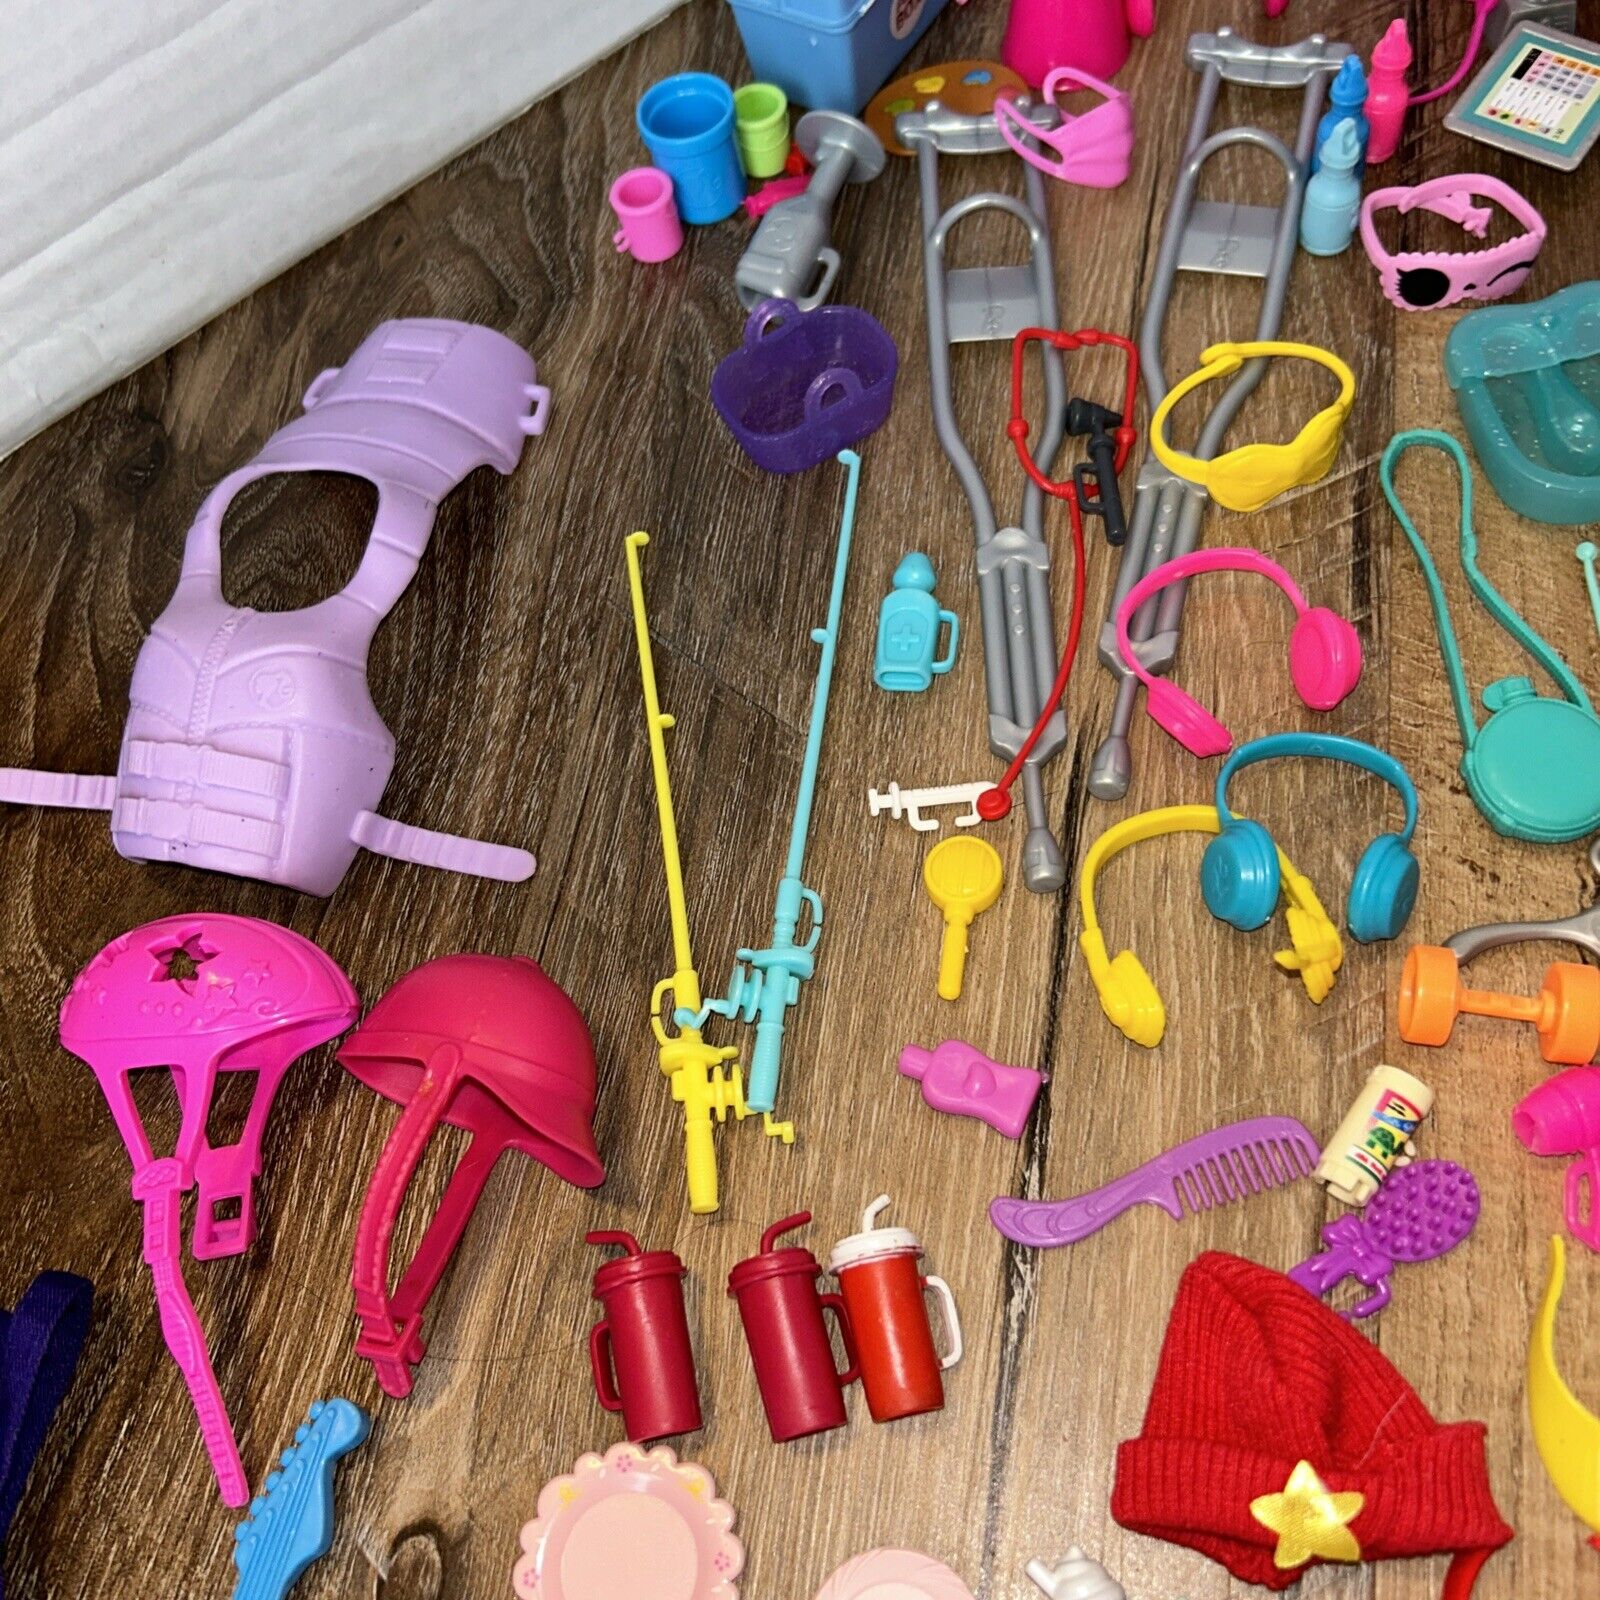 Barbie Accessories Mixed Lot Food Dishes Pets Babies Shoes